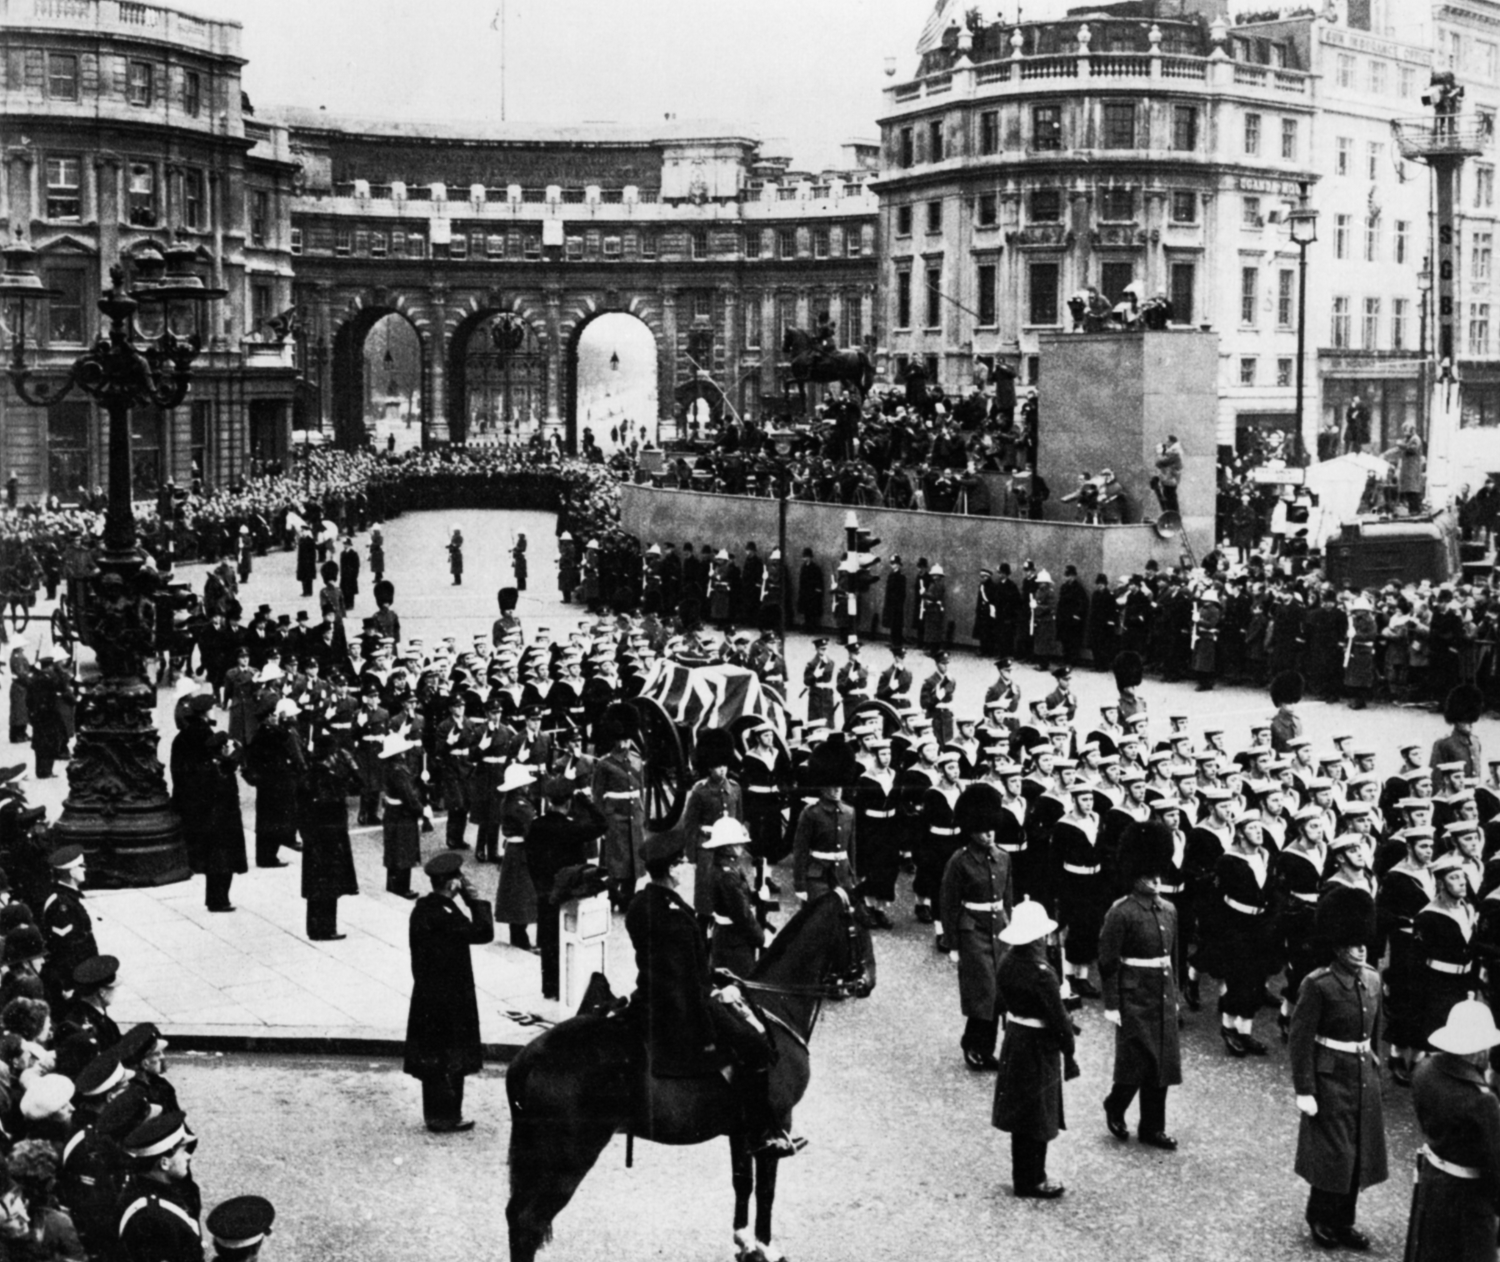 The procession at Admiralty Arch